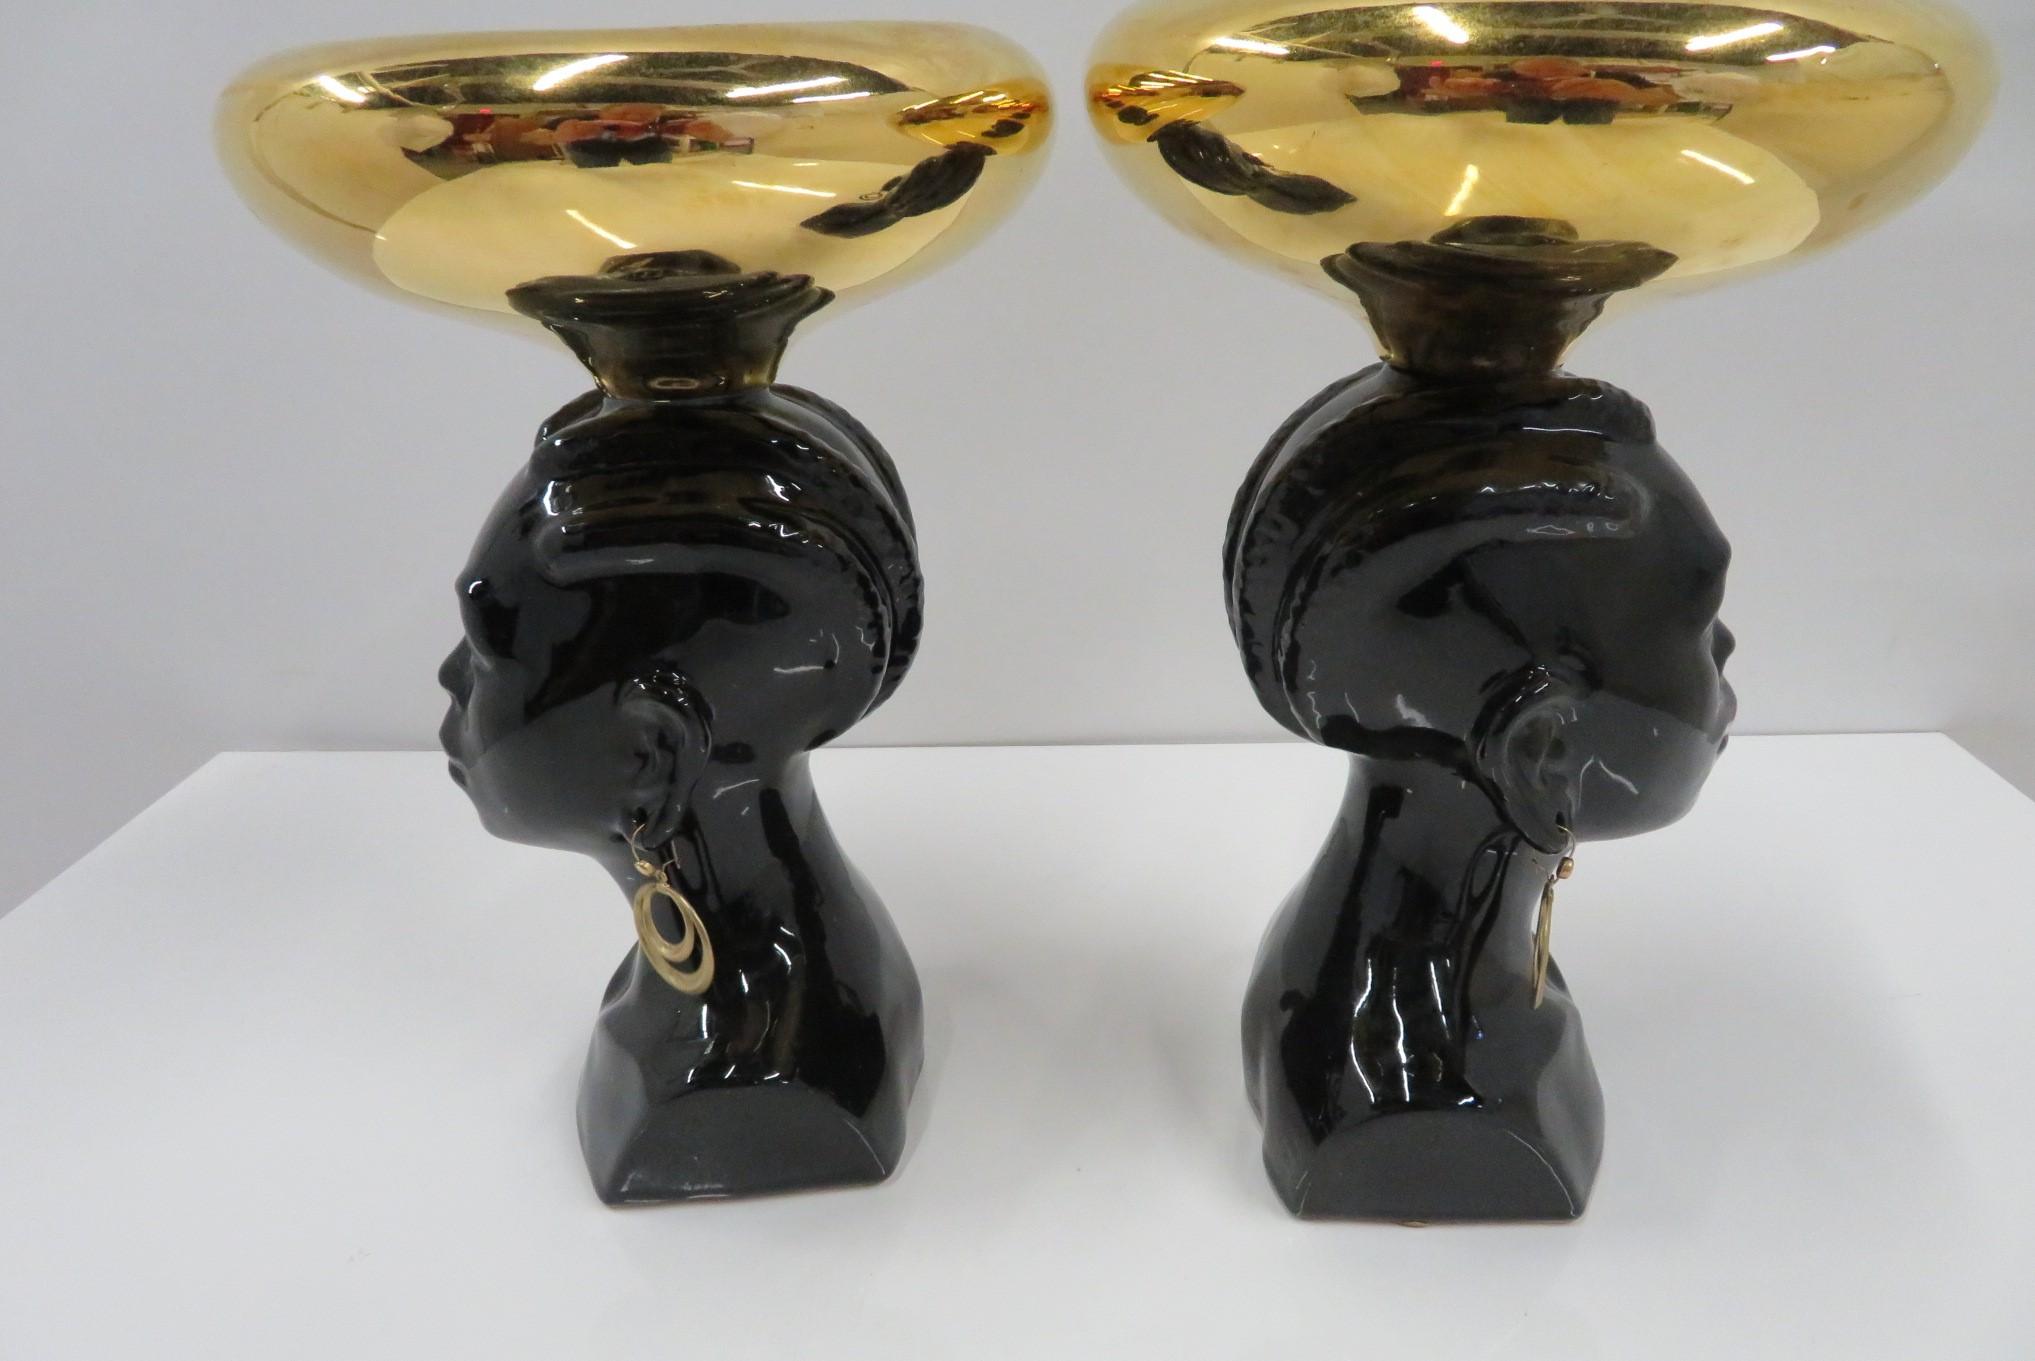 American Mid-Century Modern Ceramic Gilt Bowls Busts of Nubian Princesses, 1950s For Sale